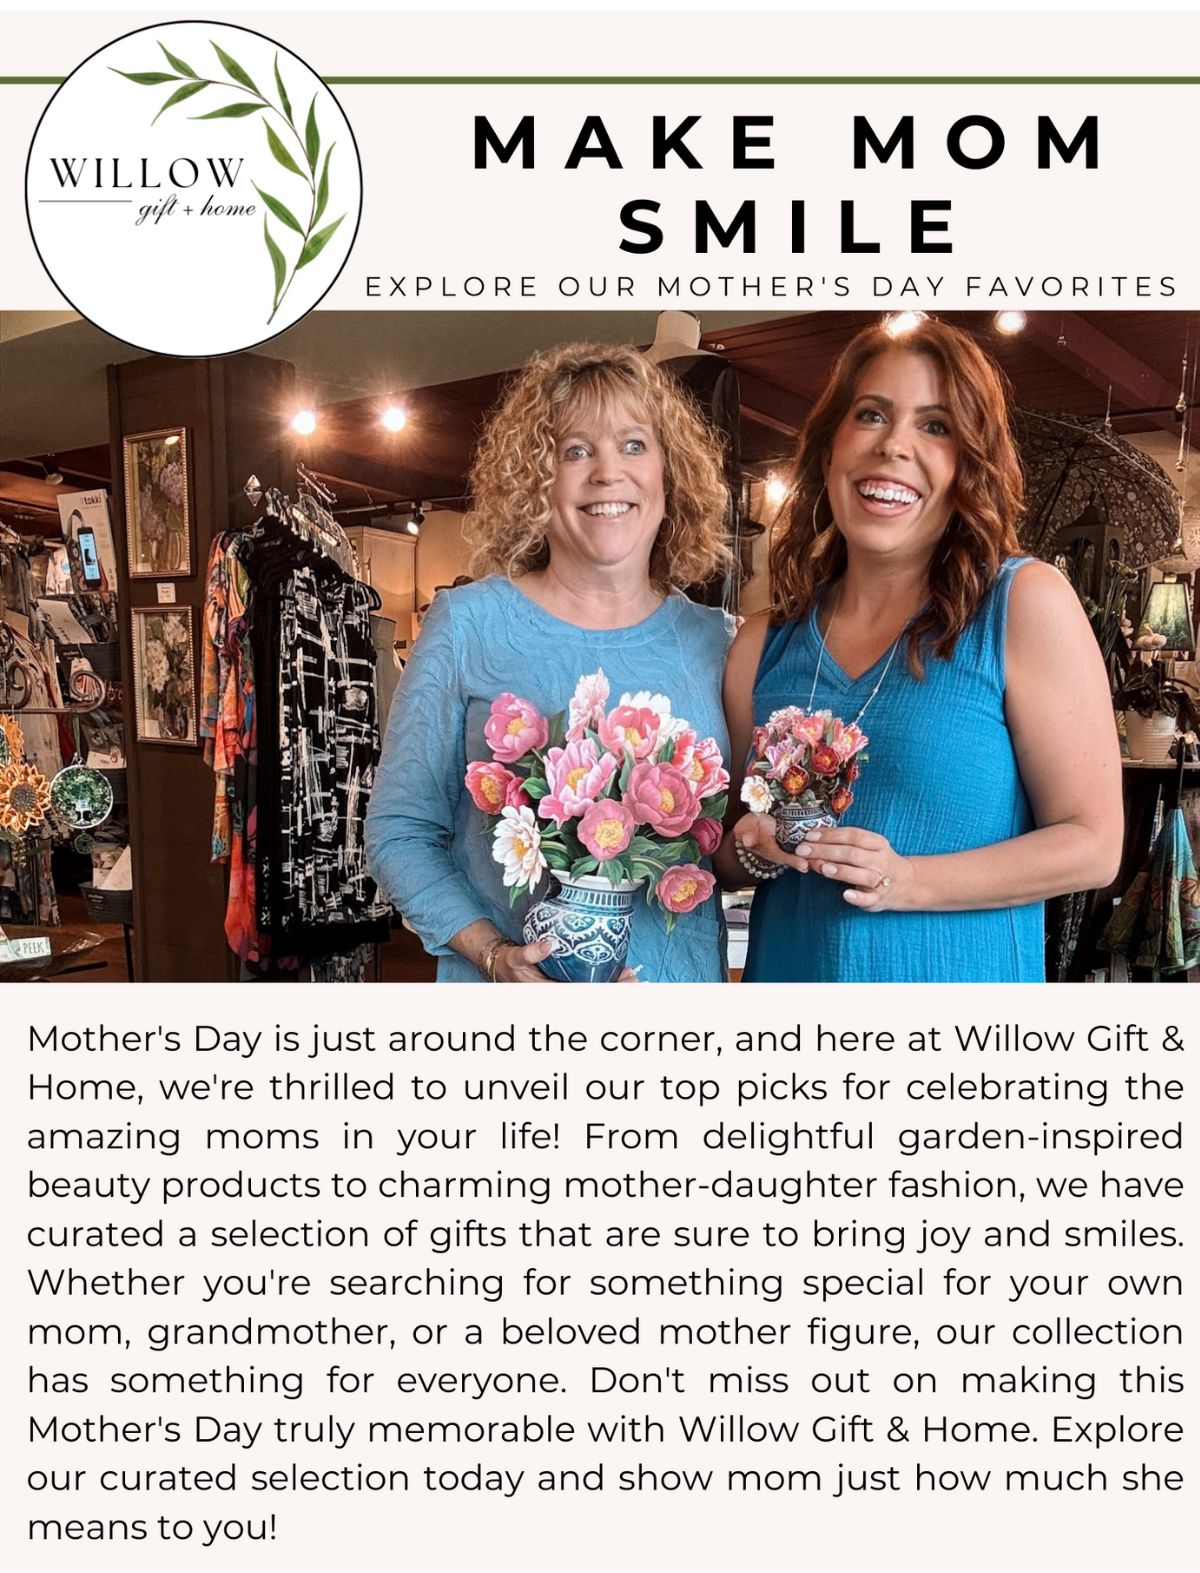 Make mother smile with gifts from Willow Gift & Home